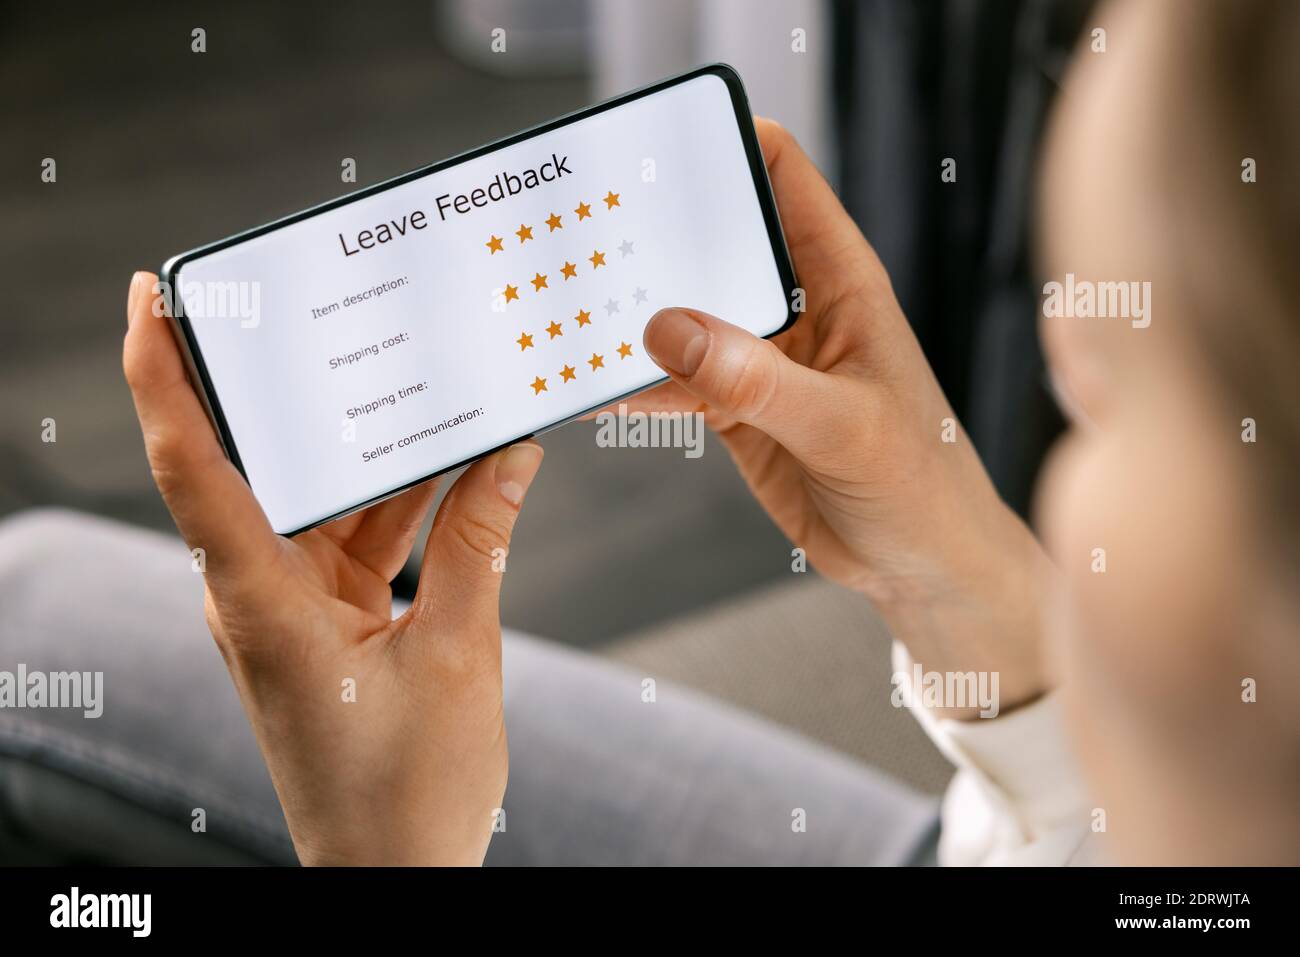 customer review - woman using phone to rate her experience about online shopping service and product quality Stock Photo